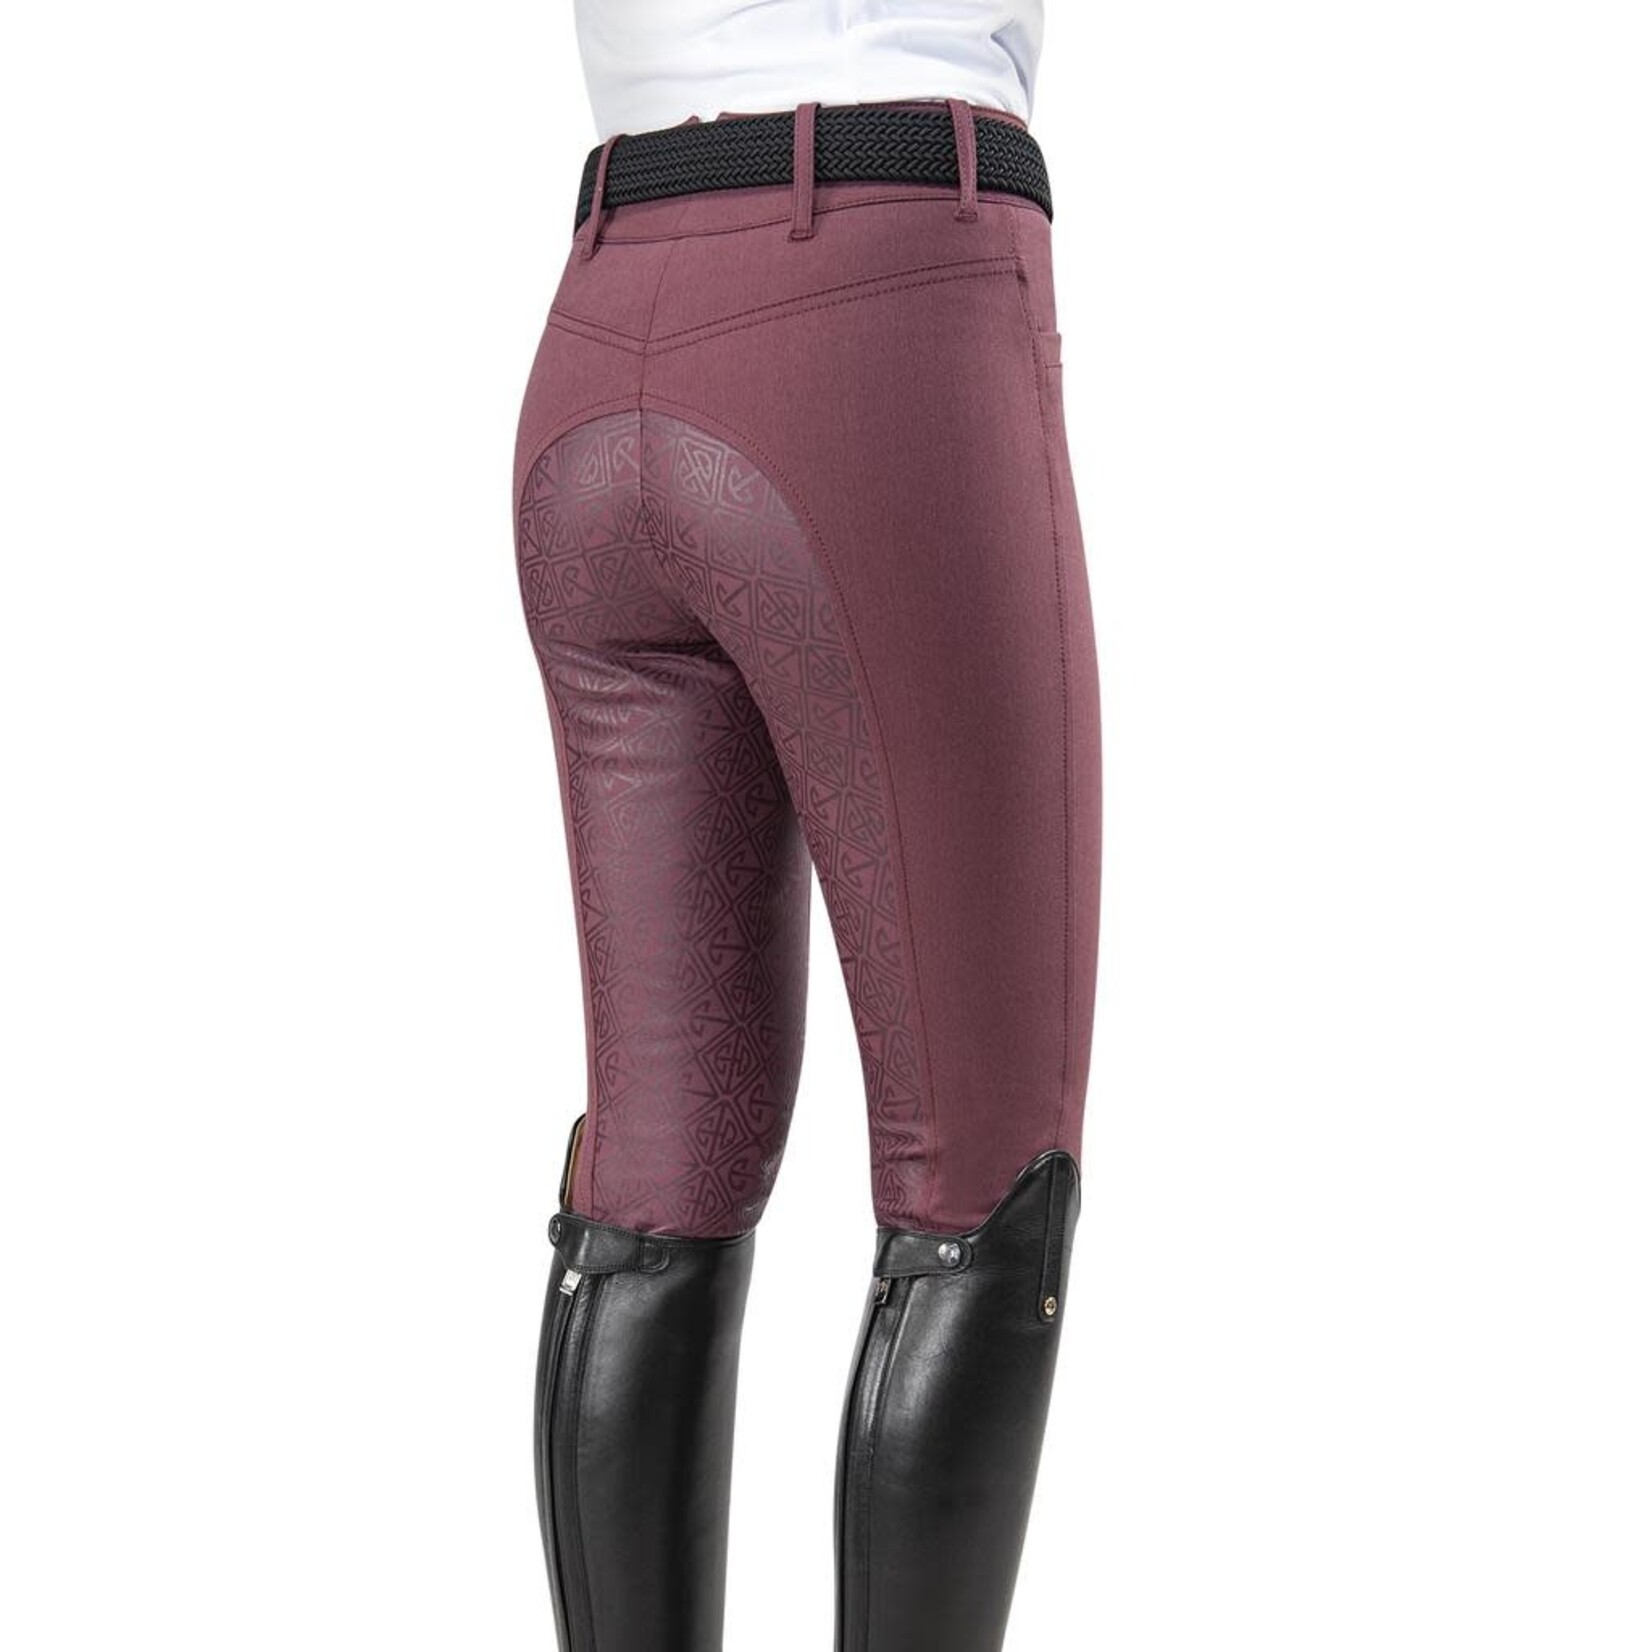 Equiline Equiline Women's Esil Breeches